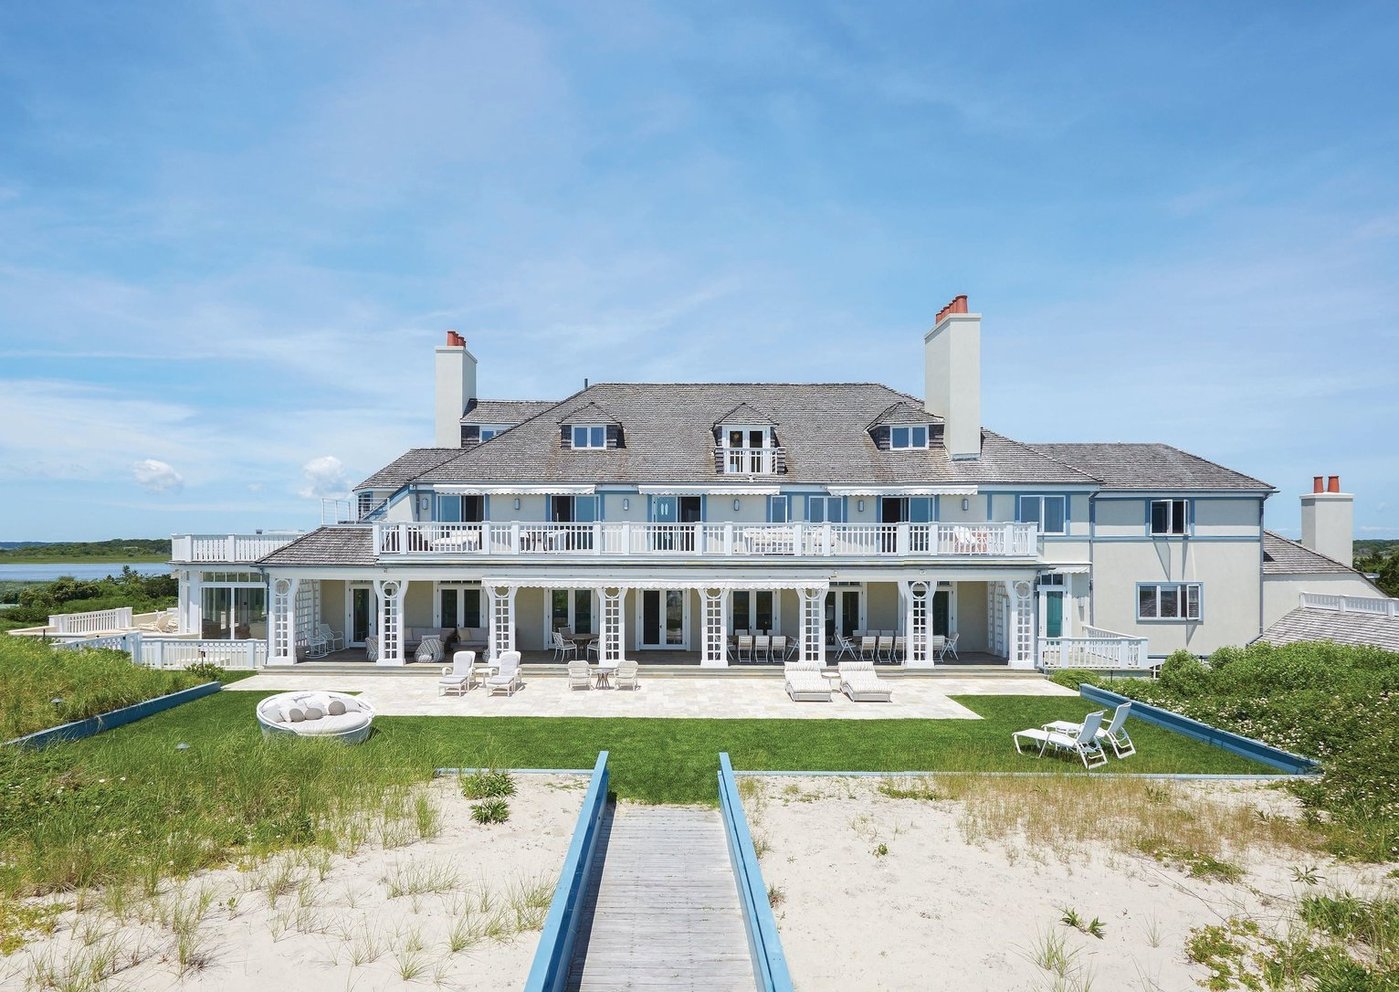 Mylestone at Meadow Lane in Southampton, listed by Bespoke at $175 million PHOTO COURTESY OF BESPOKE REAL ESTATE